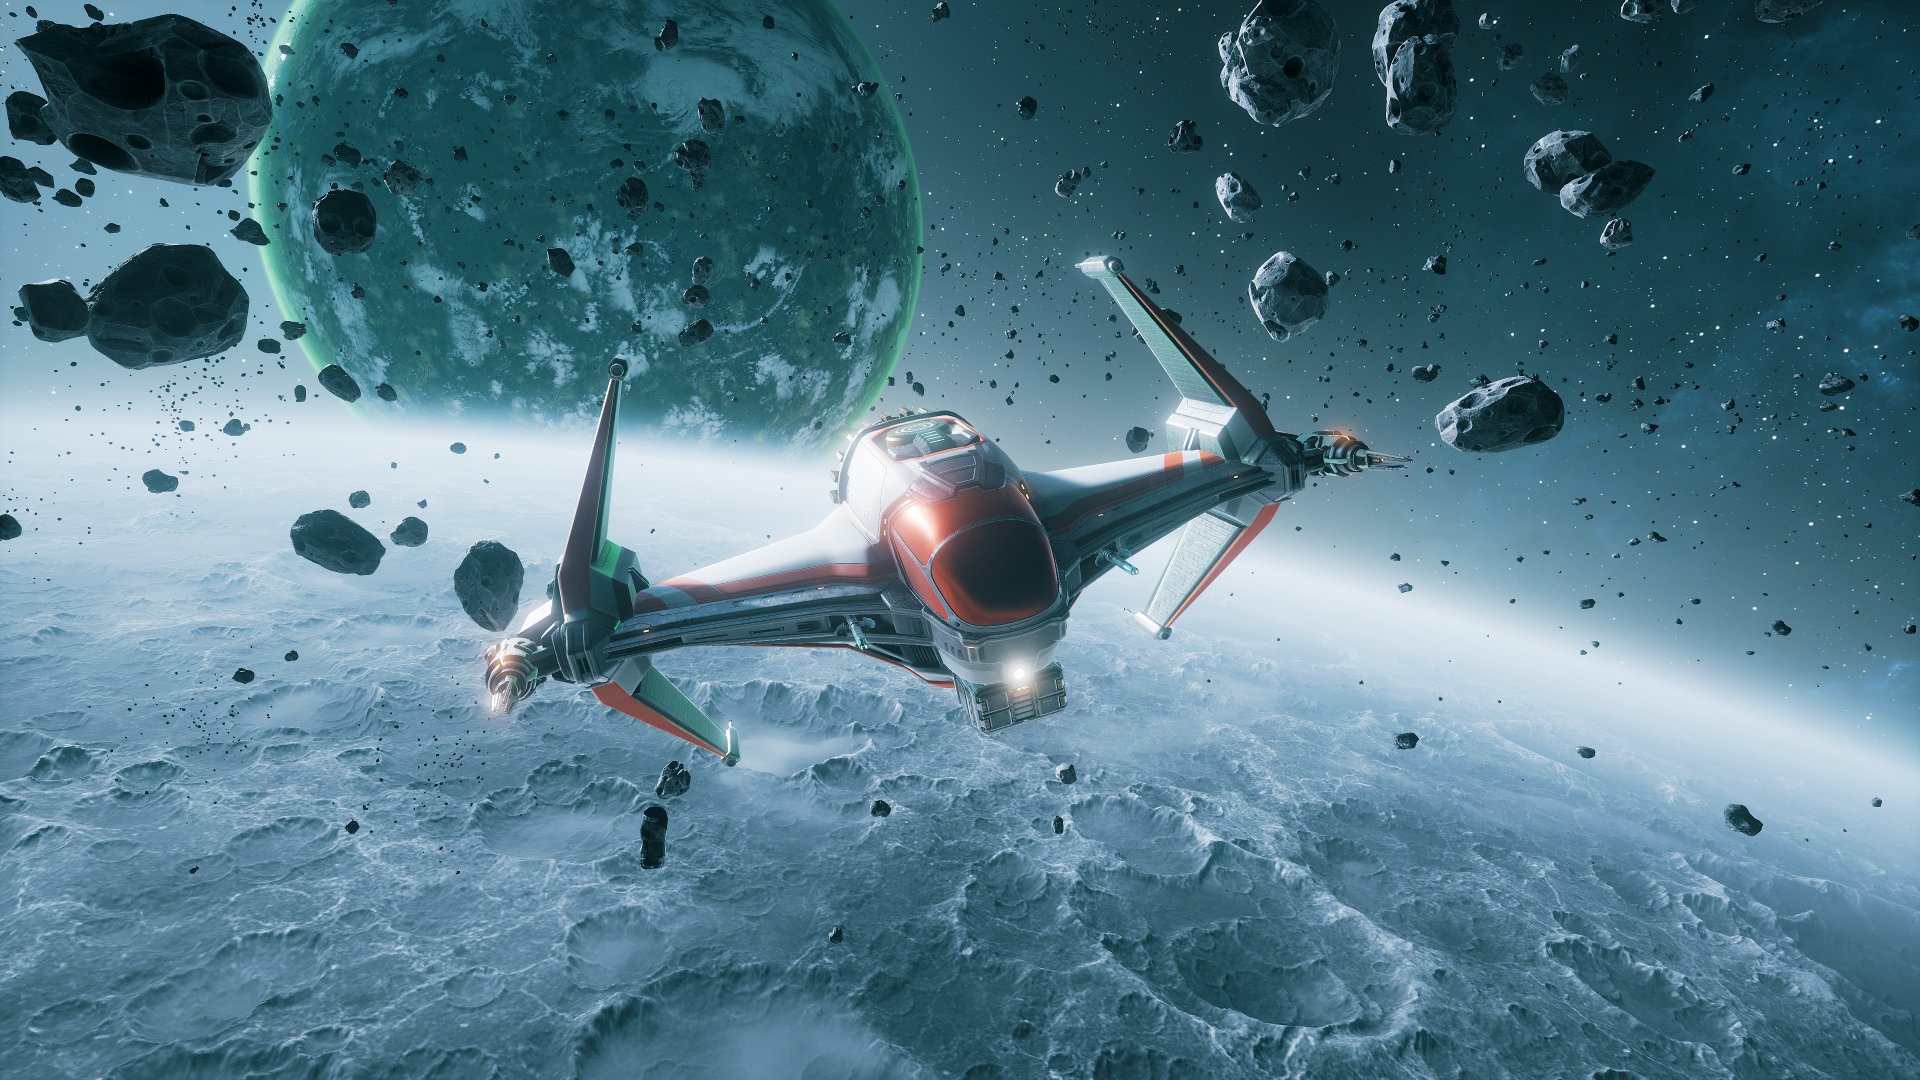 Video Game Everspace 1920x1080